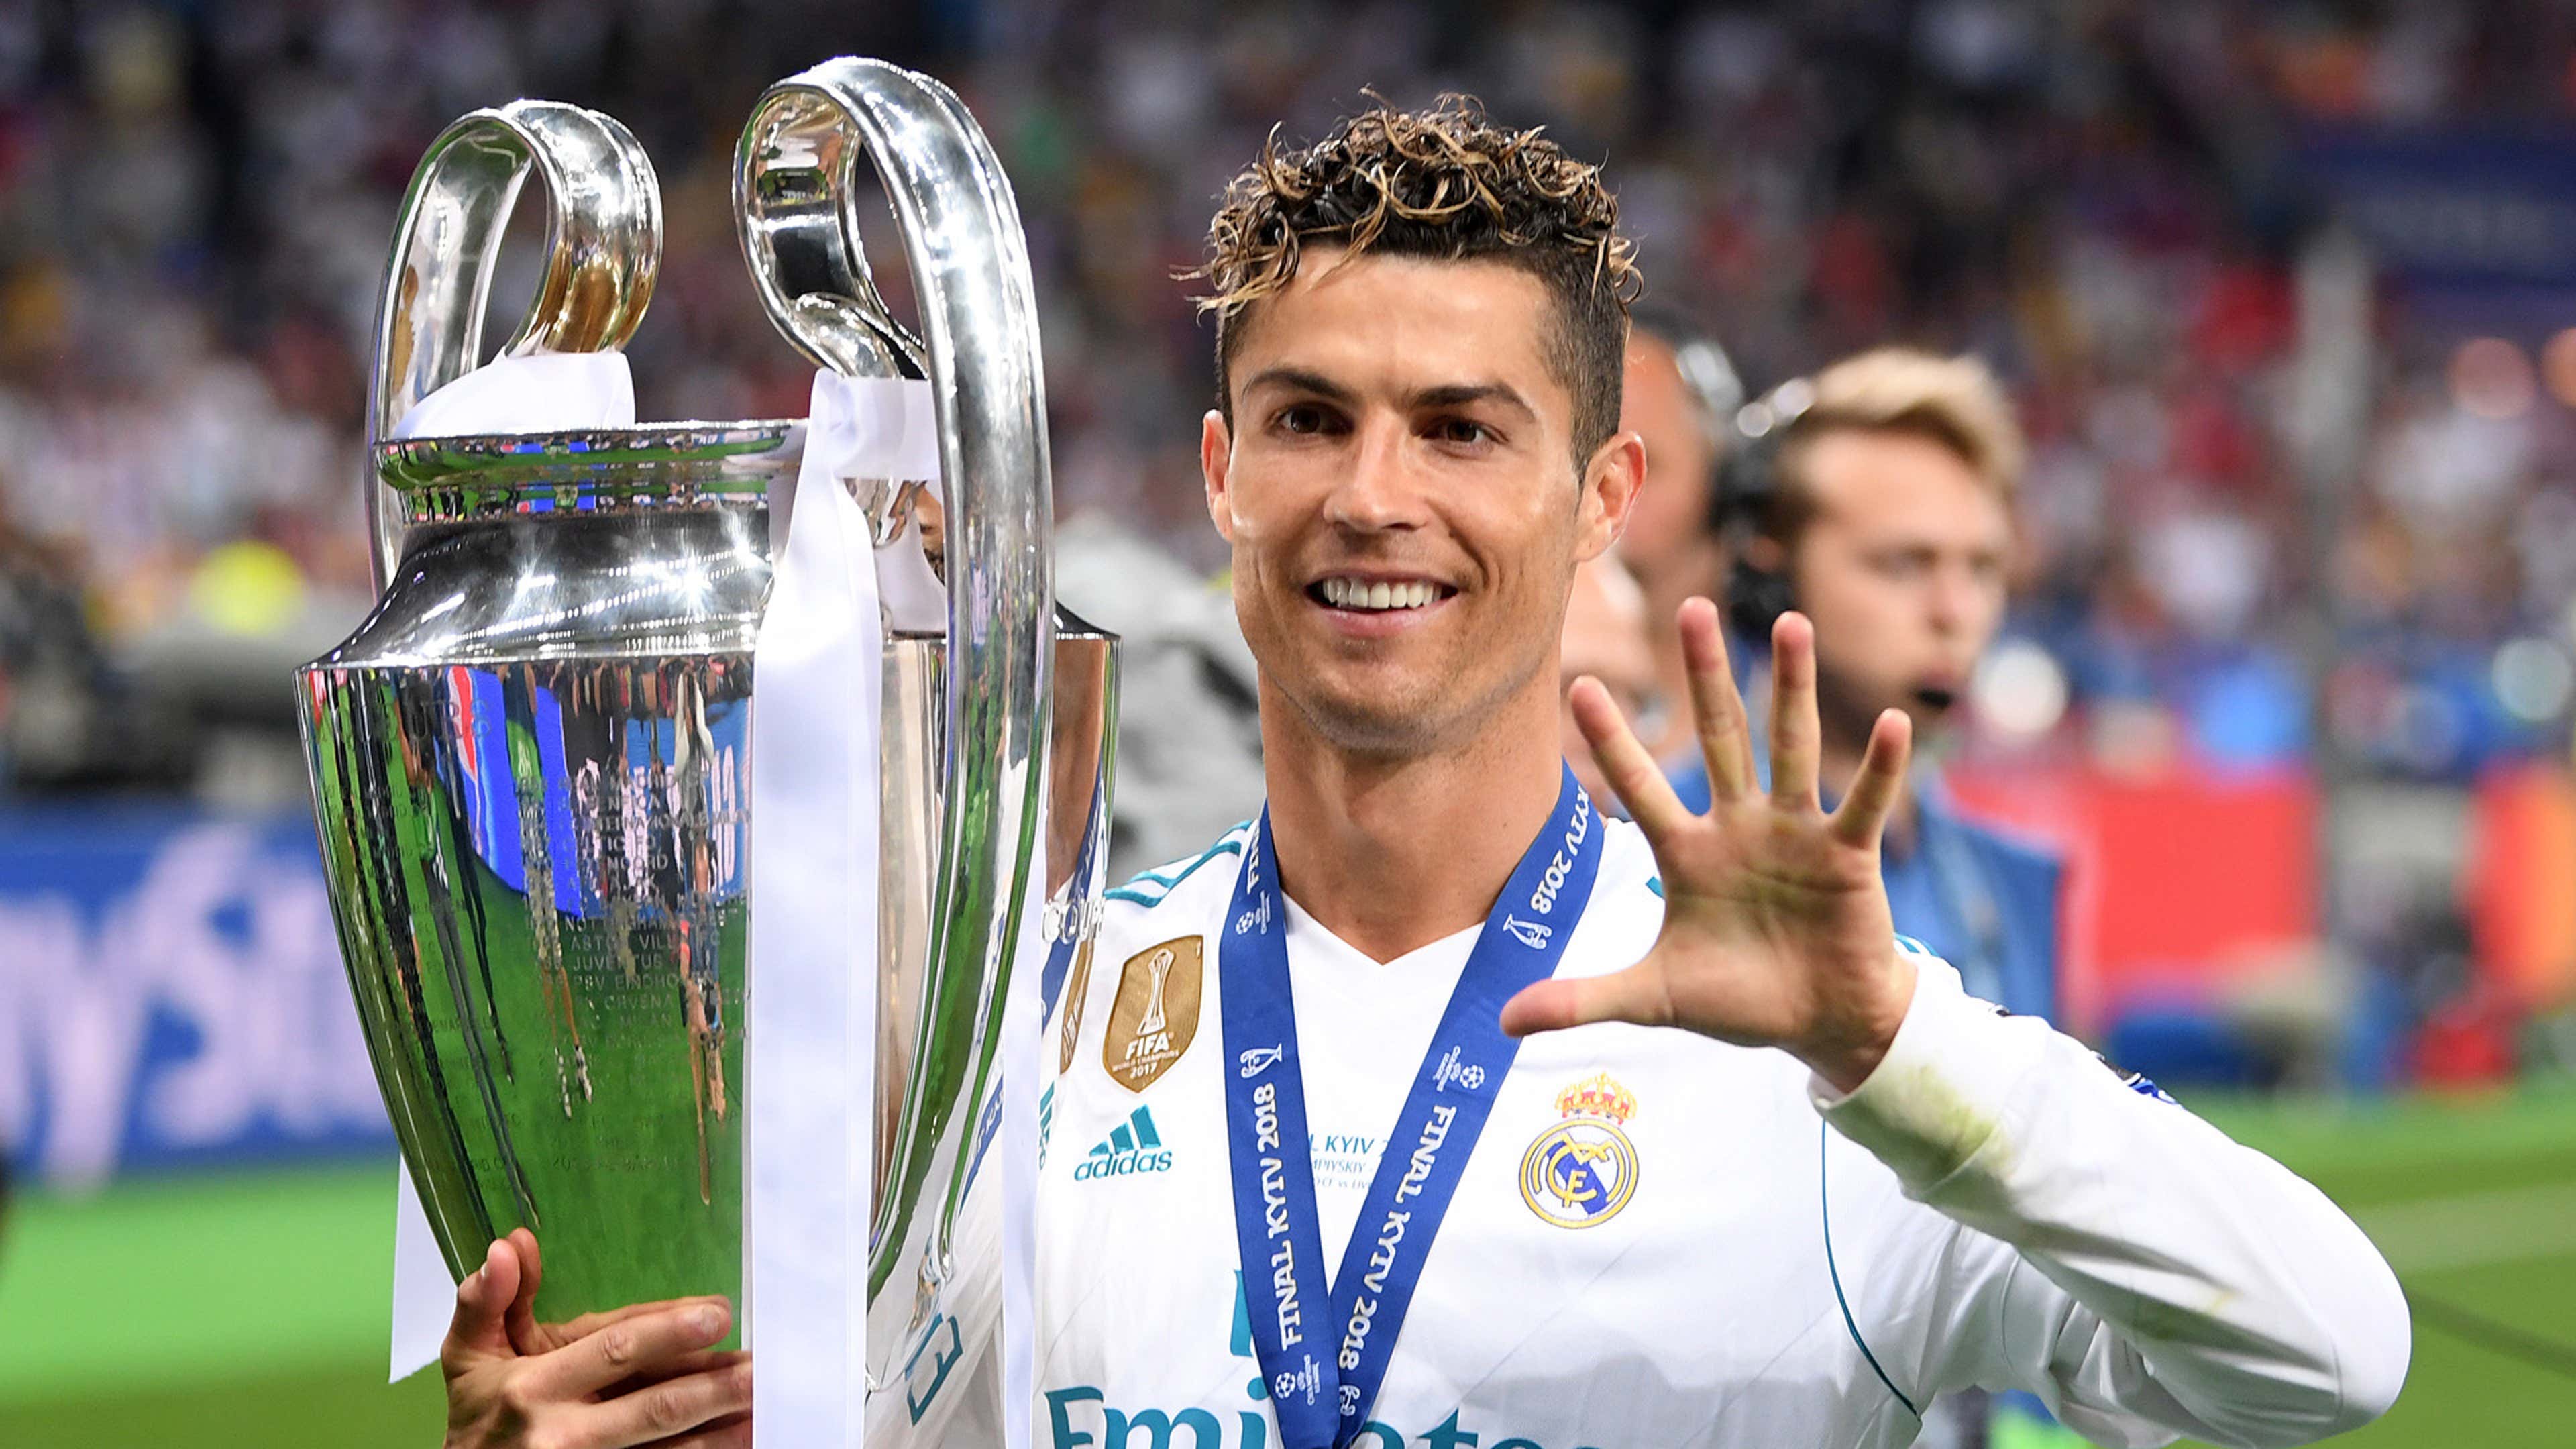 Which players have won the most Champions League titles?